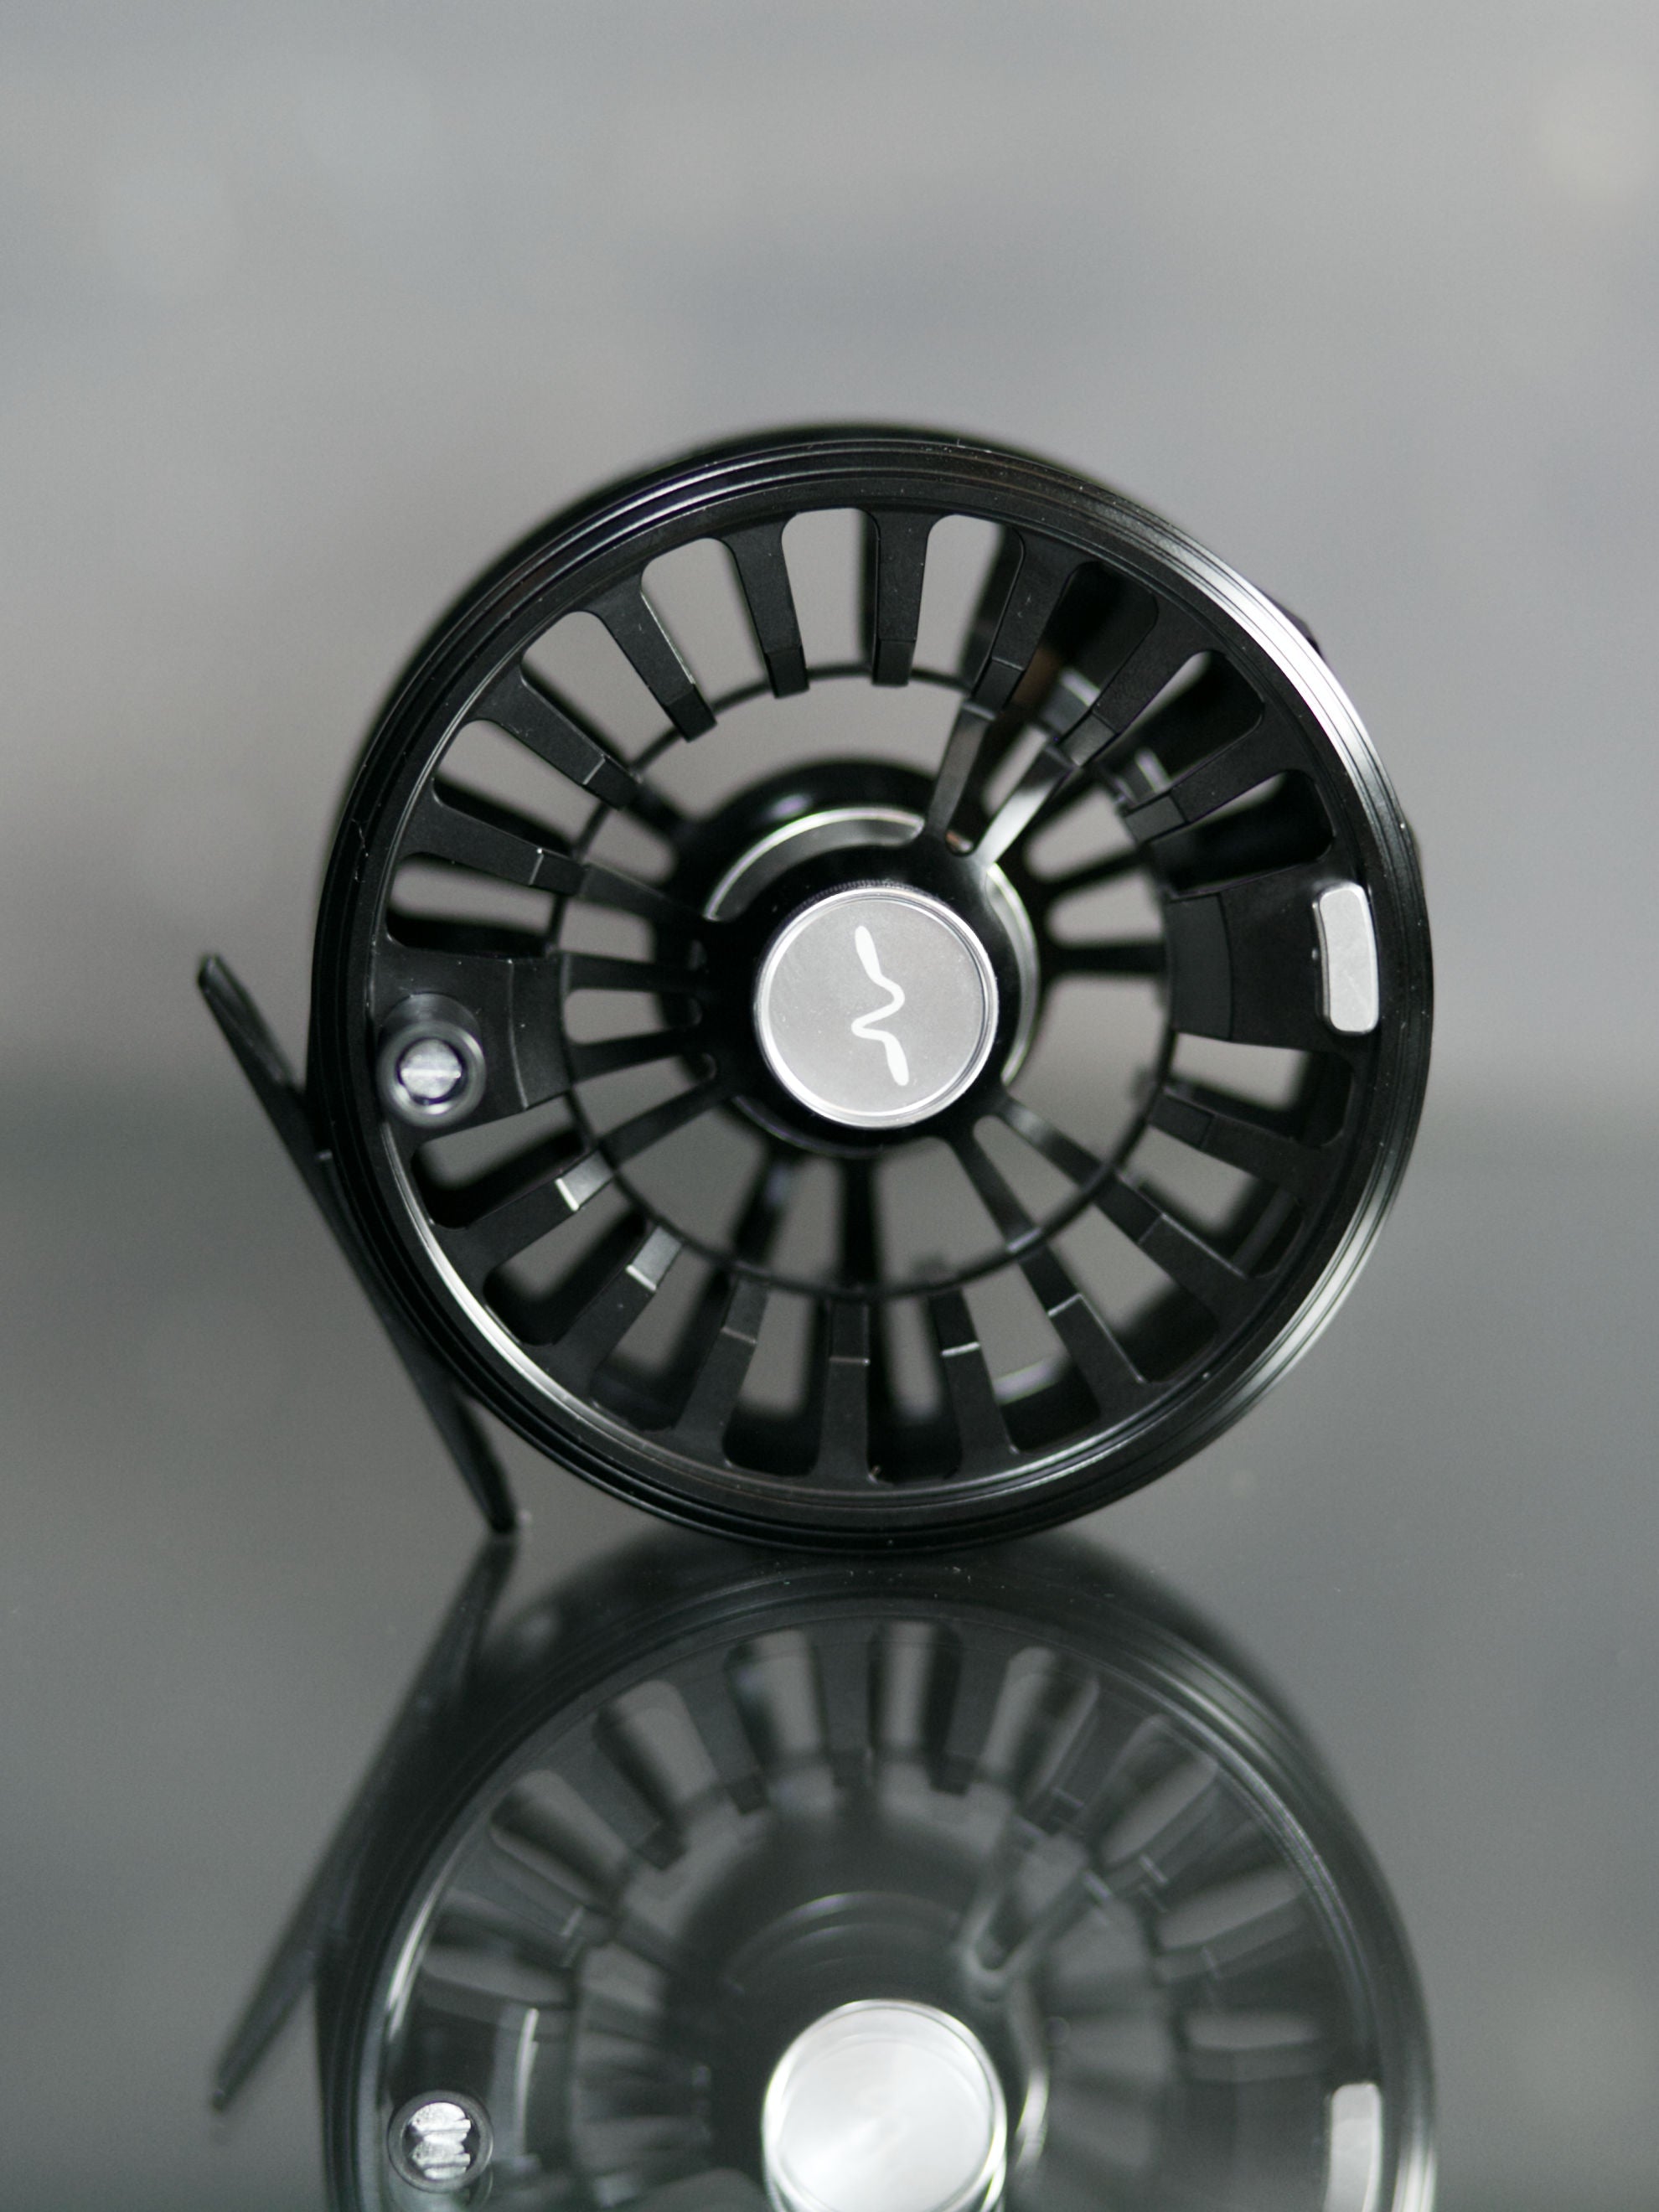 Guideline HALO Black Stealth fly reel - Green Trail Oy webstore